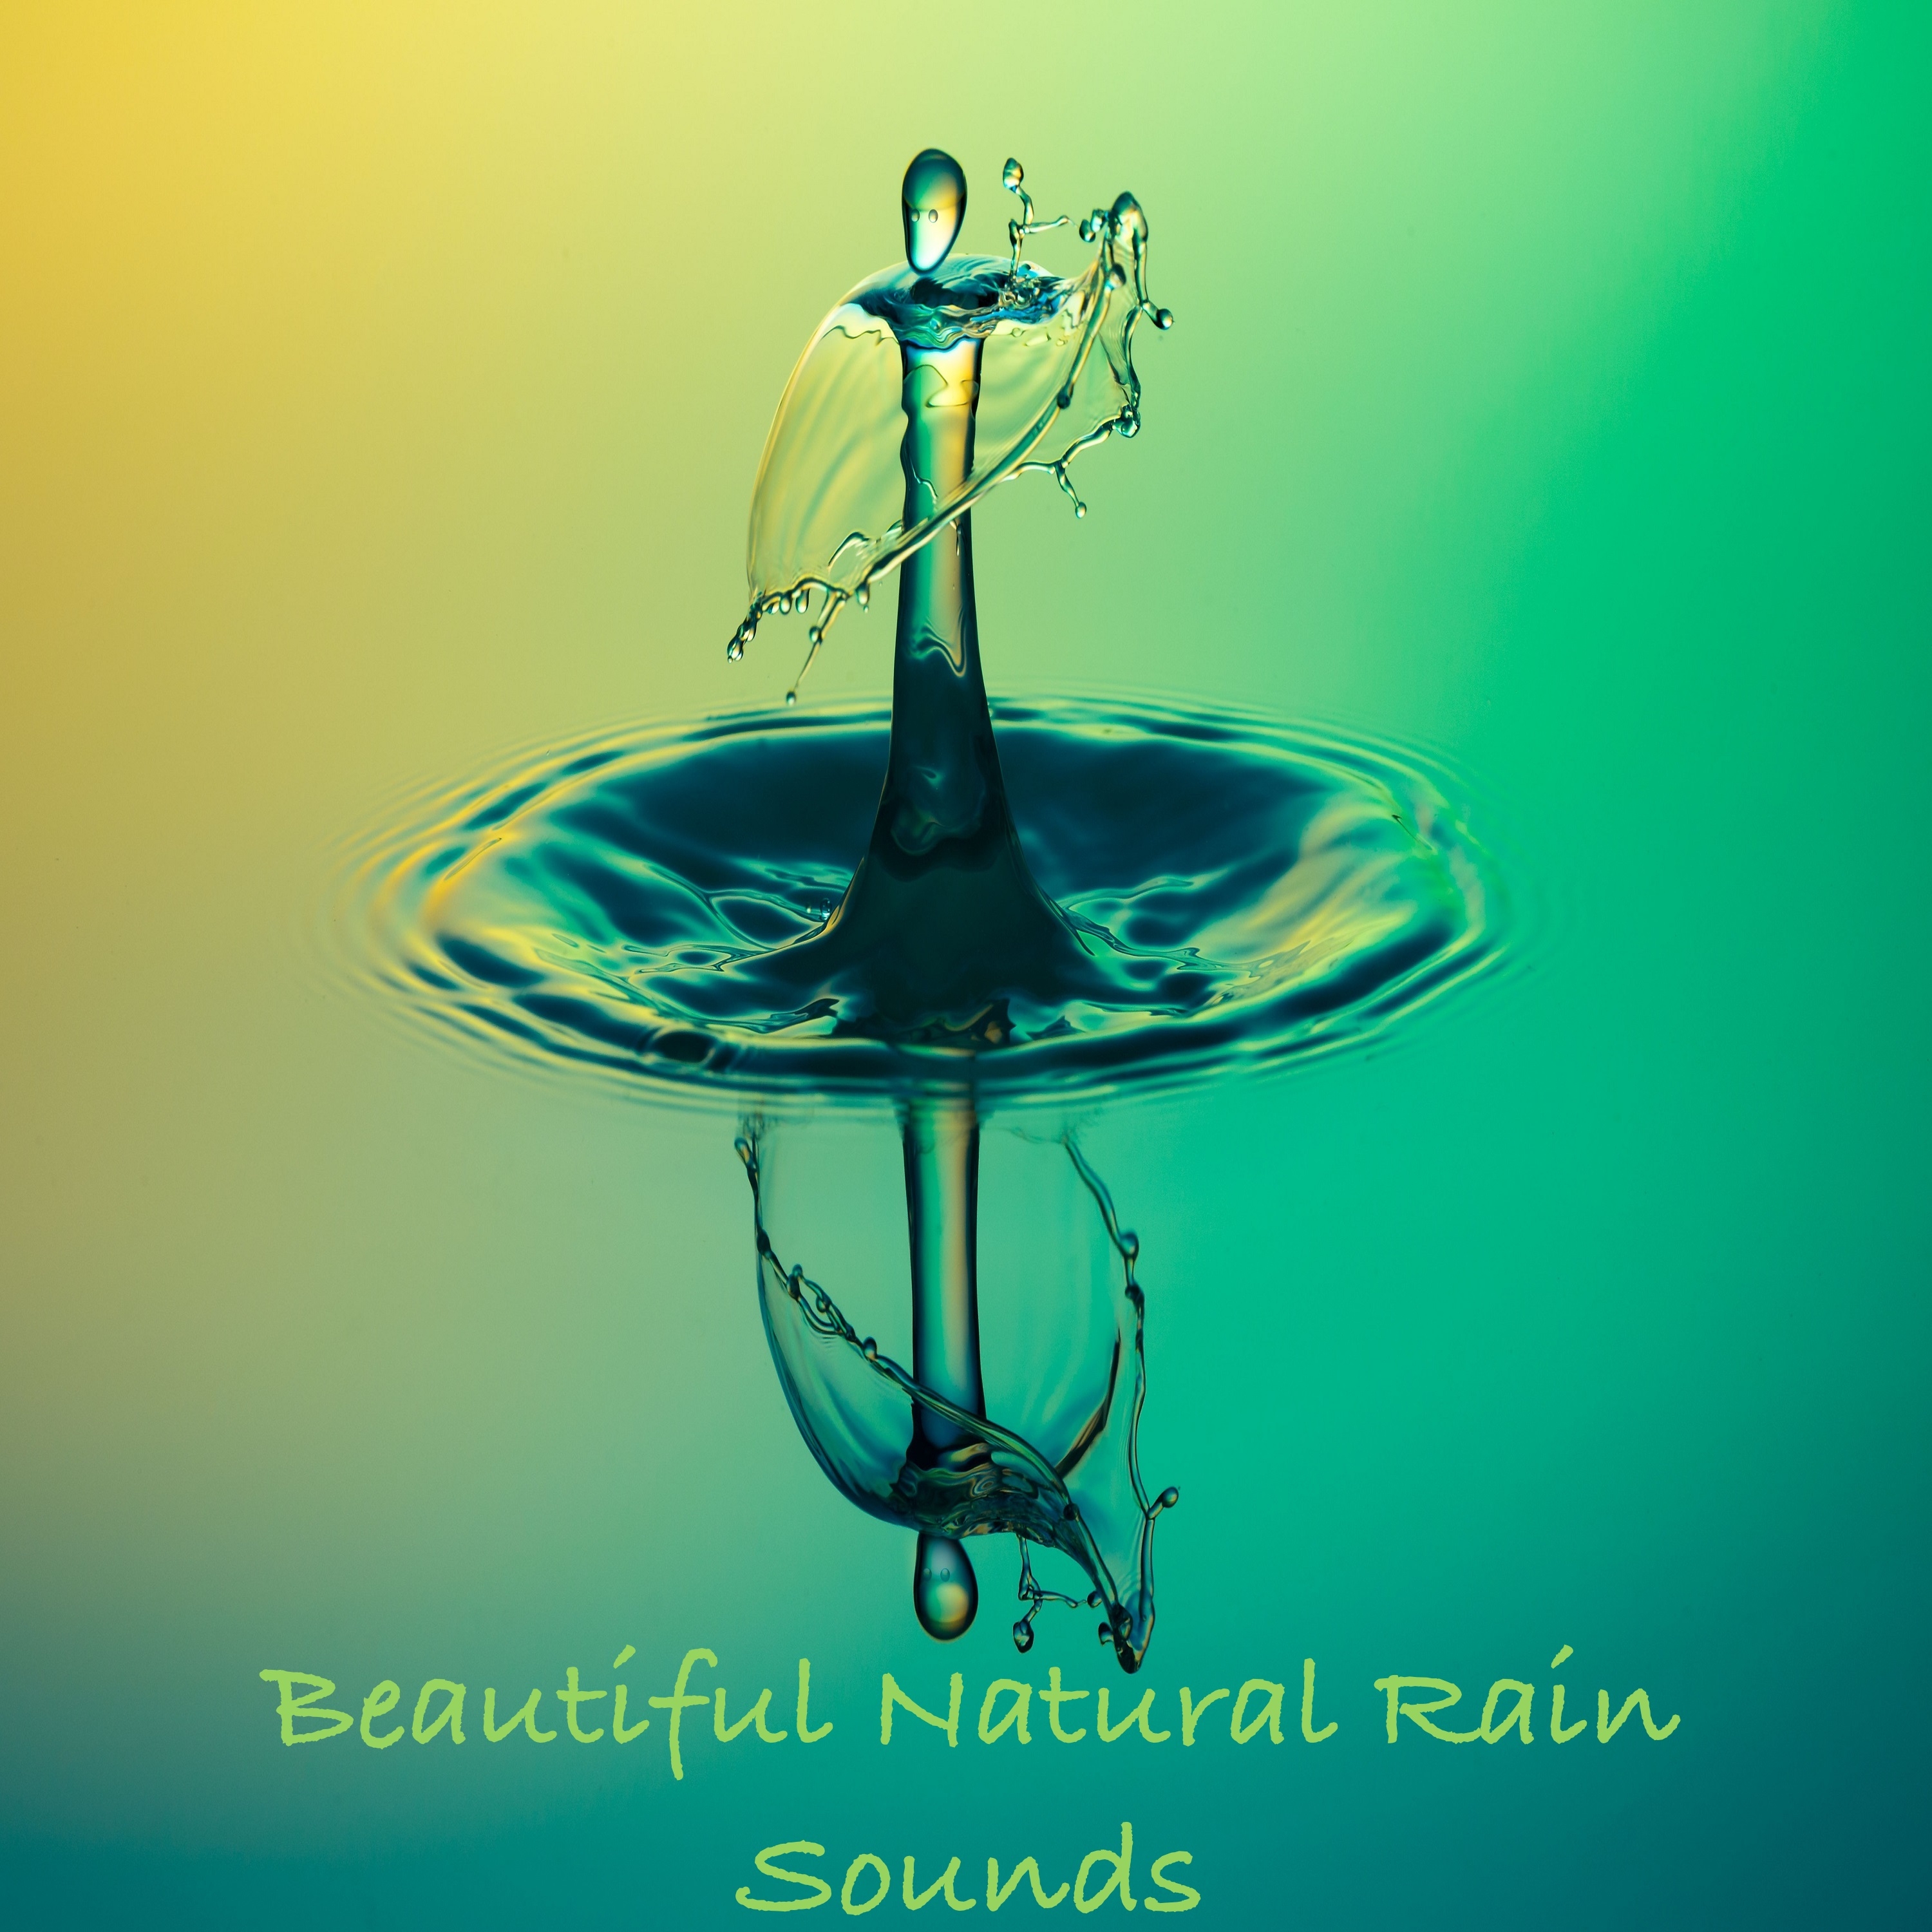 10 Beautiful Natural Rain Sounds, Cascading Water for Meditation, Calm Rainfall for Sleep, Gentle Sounds to Soothe and Relax